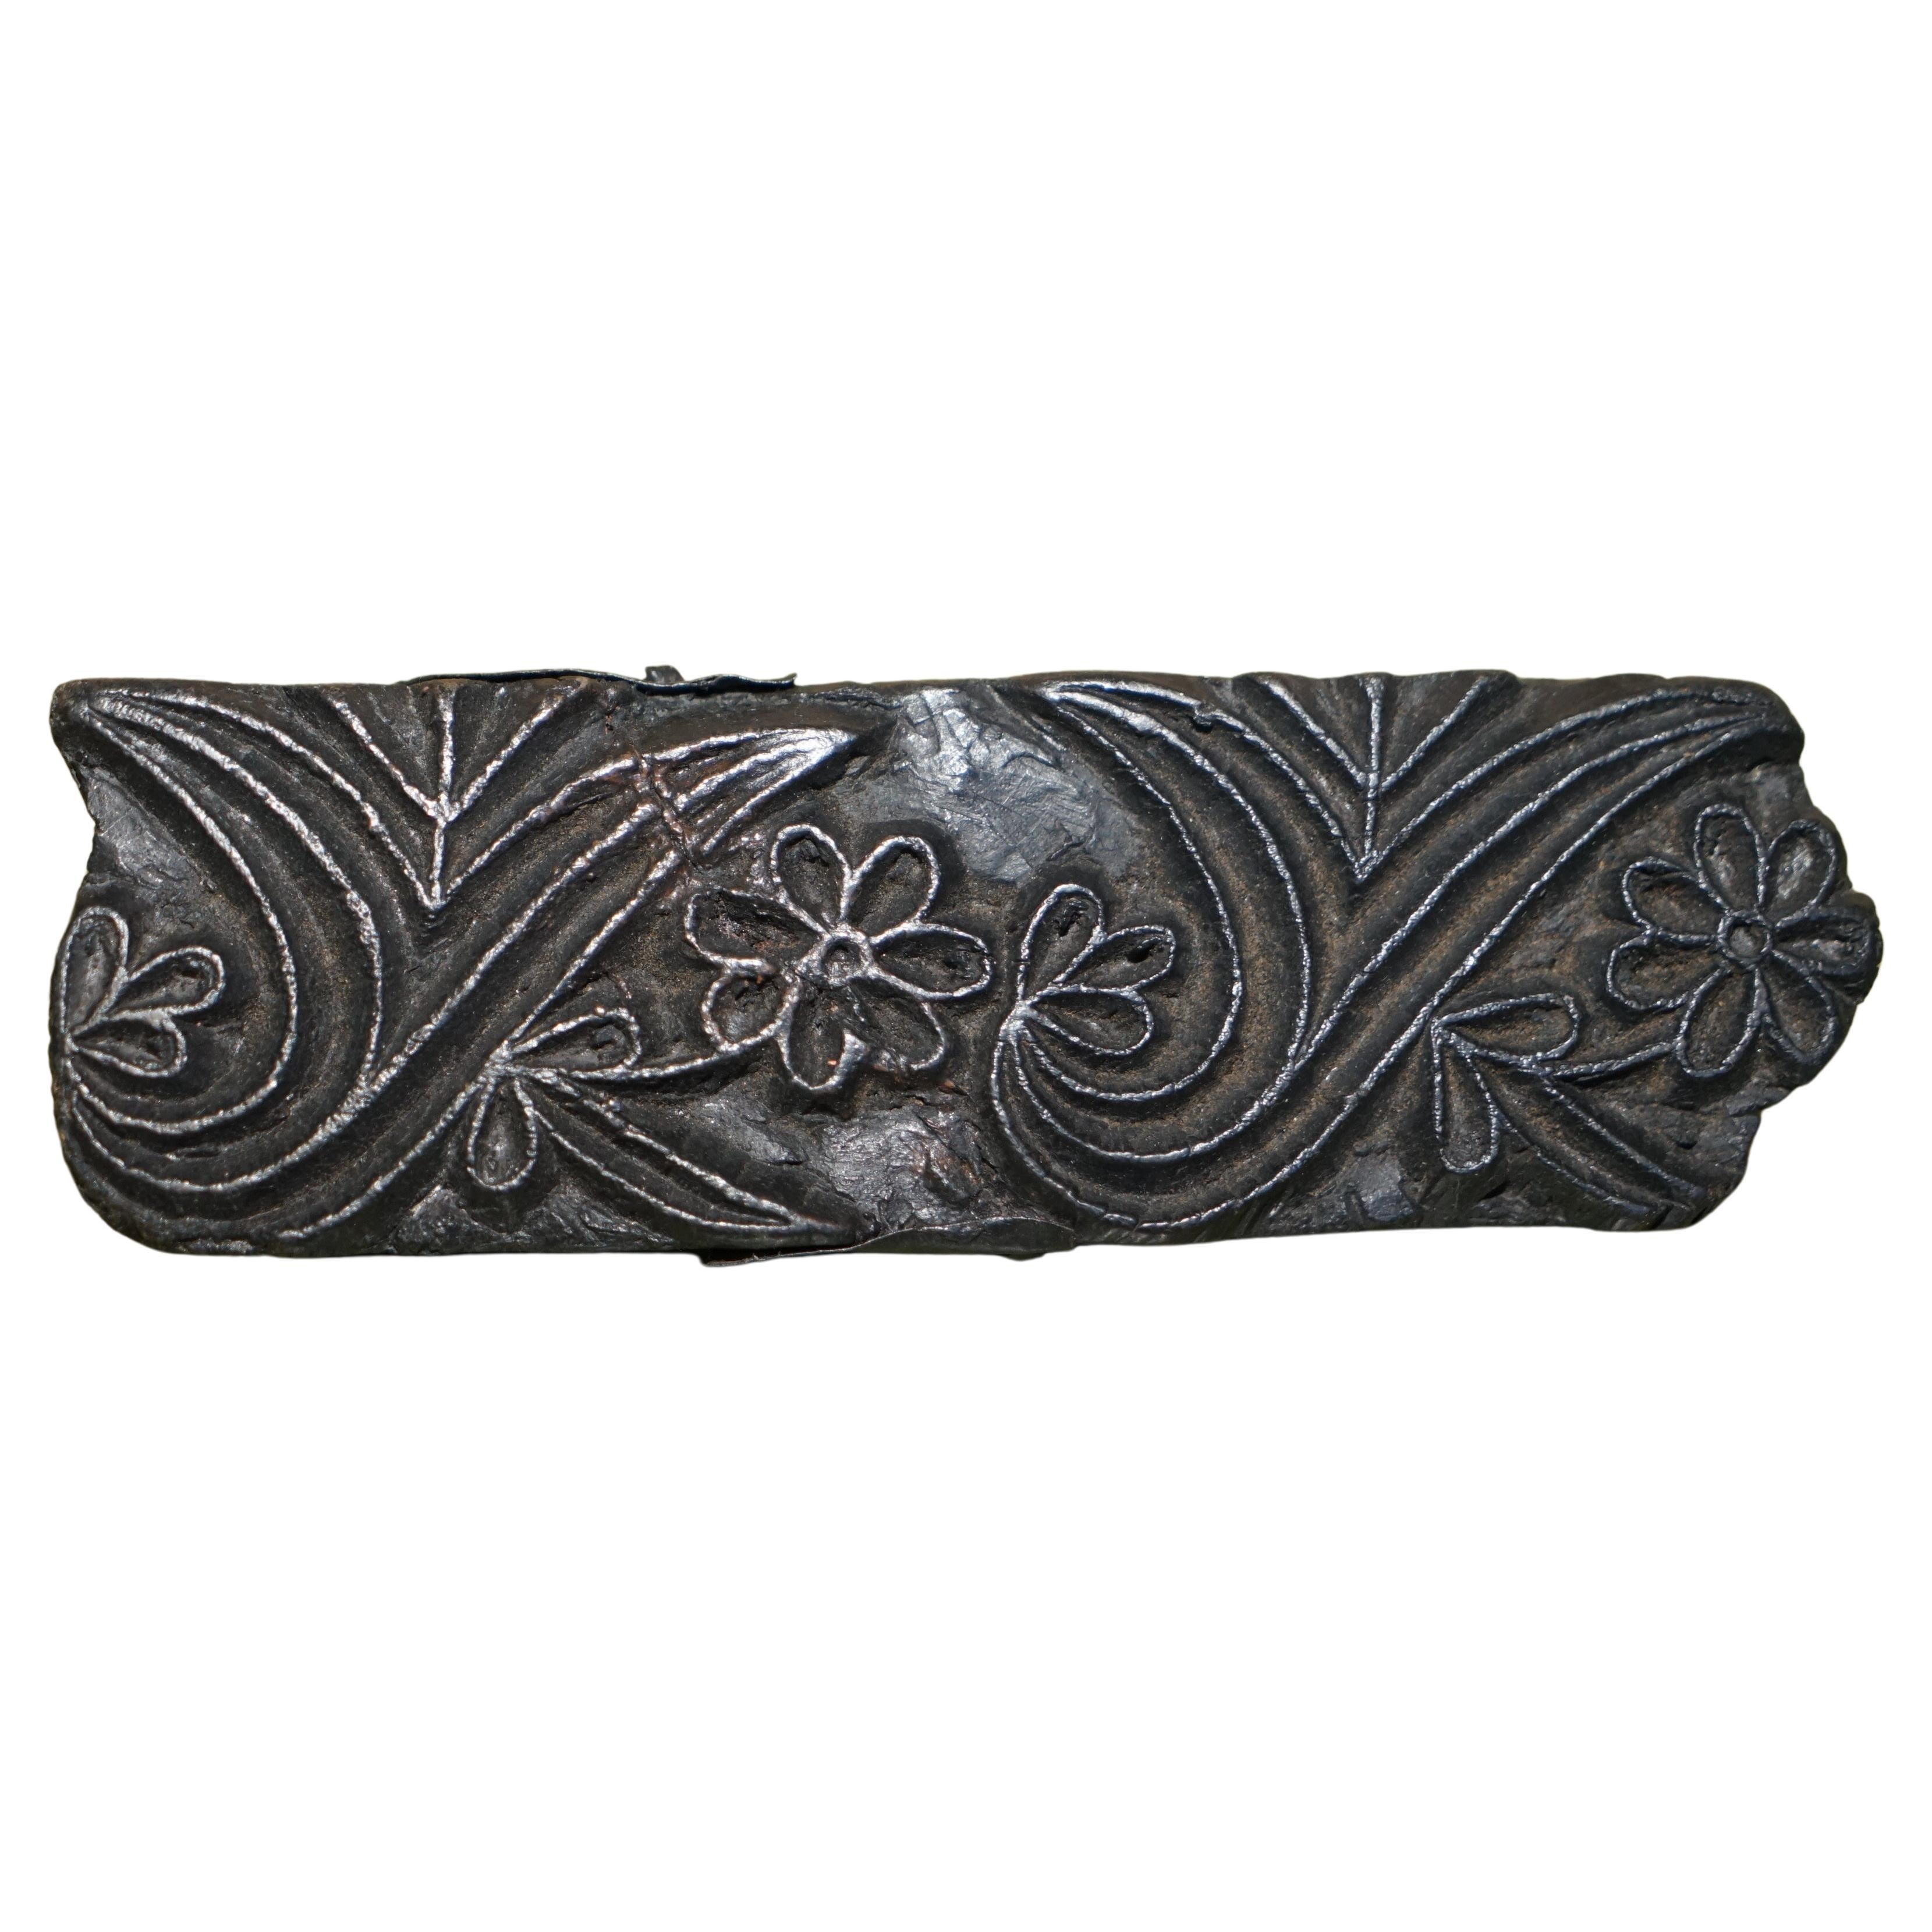 VERY COLLECTABLE ANTIQUE HAND CARVED SWiRLY BOARDER PRINTING BLOCK FOR WALLPAPER For Sale